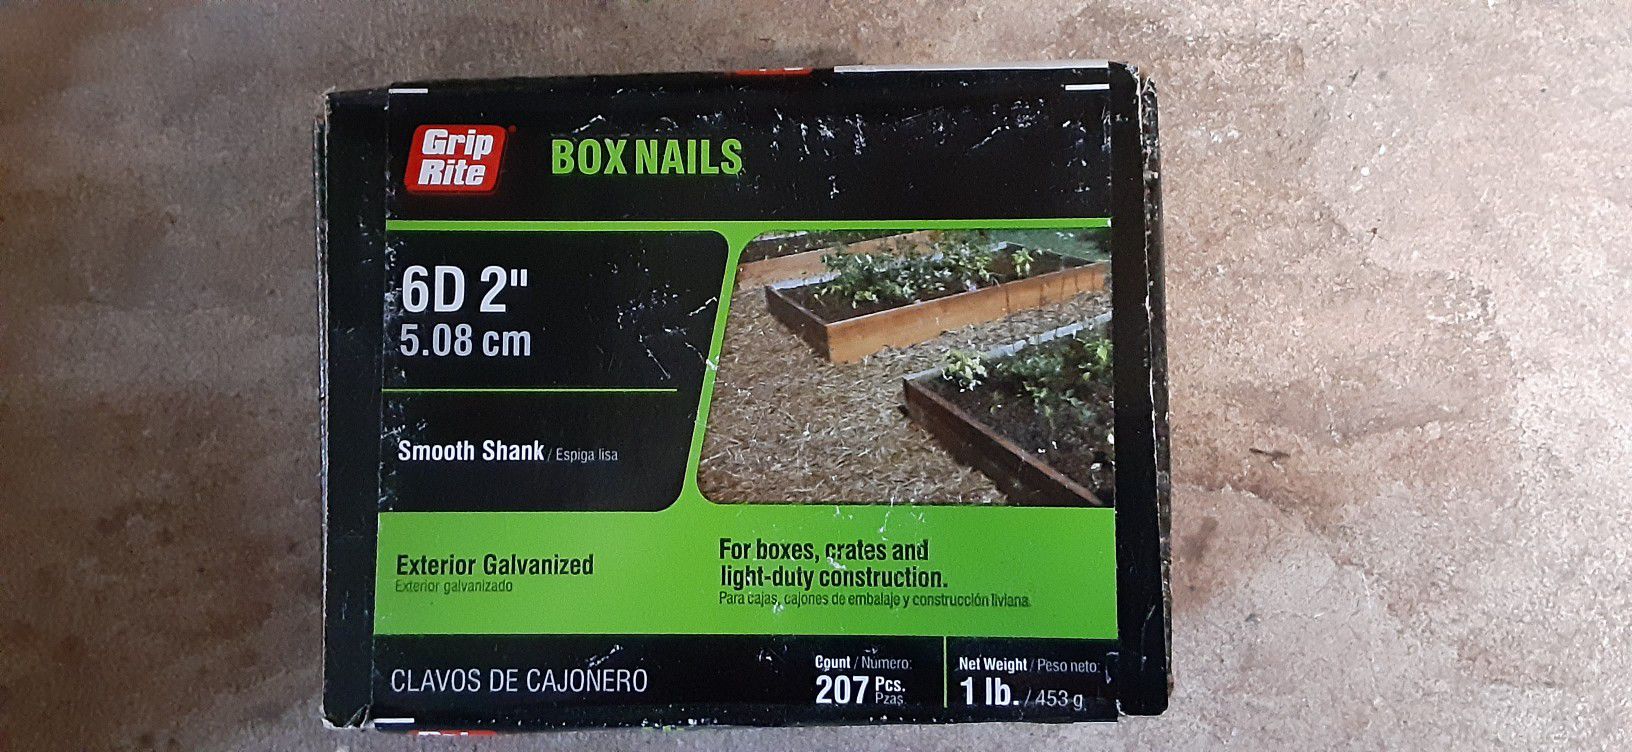 Brand new boxes of nails